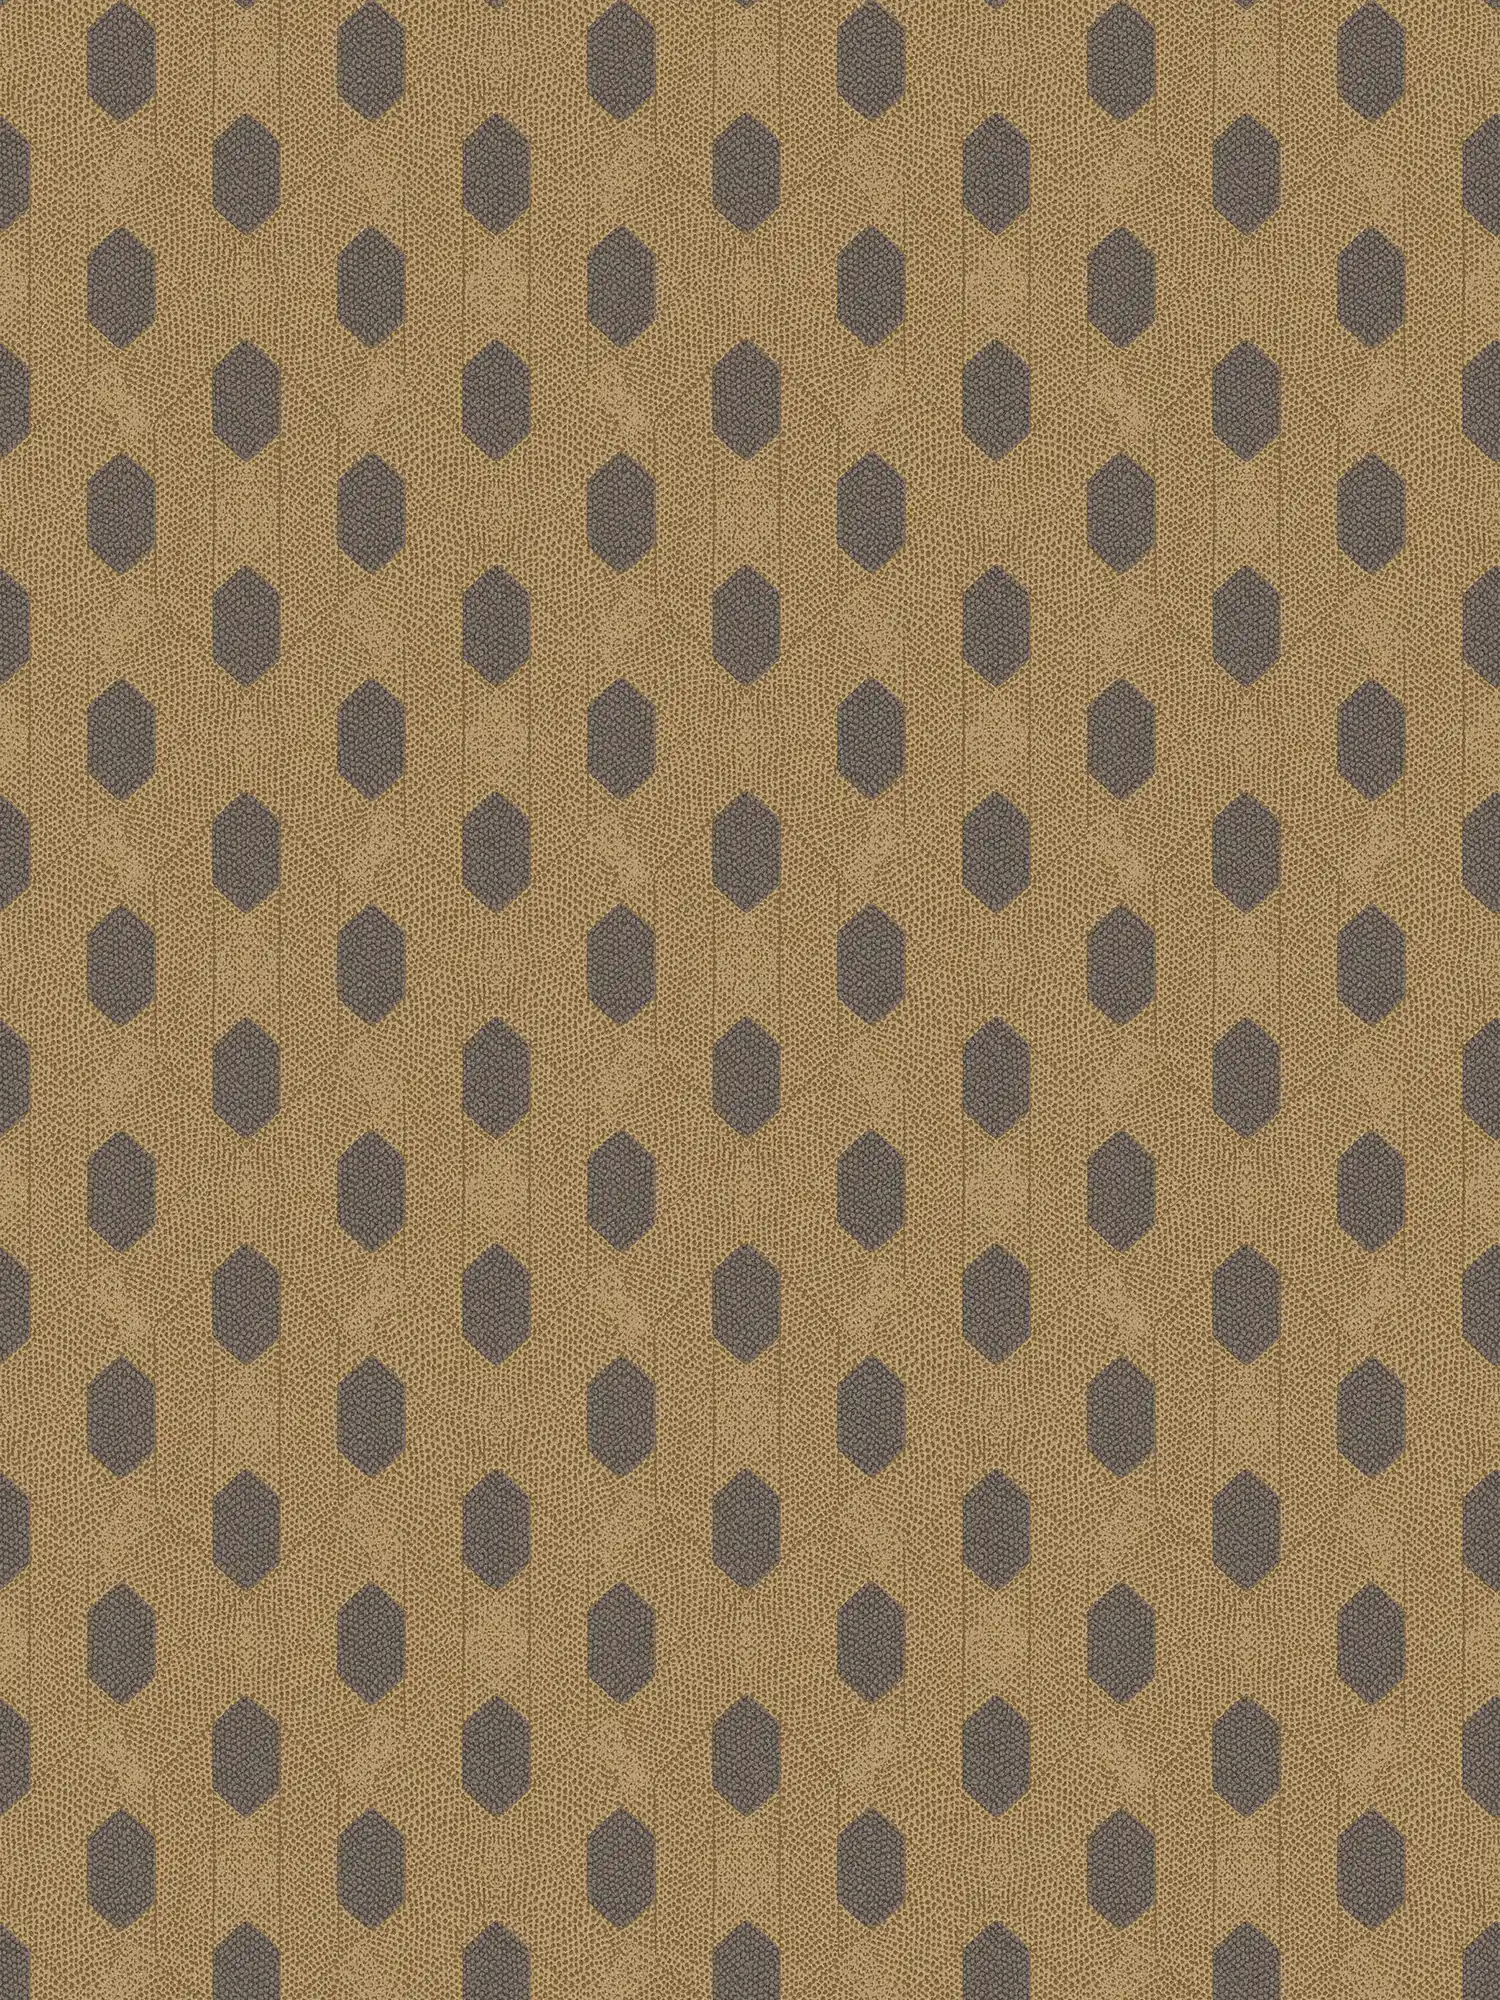 Non-woven wallpaper gold with geometric pattern - brown, gold, black
